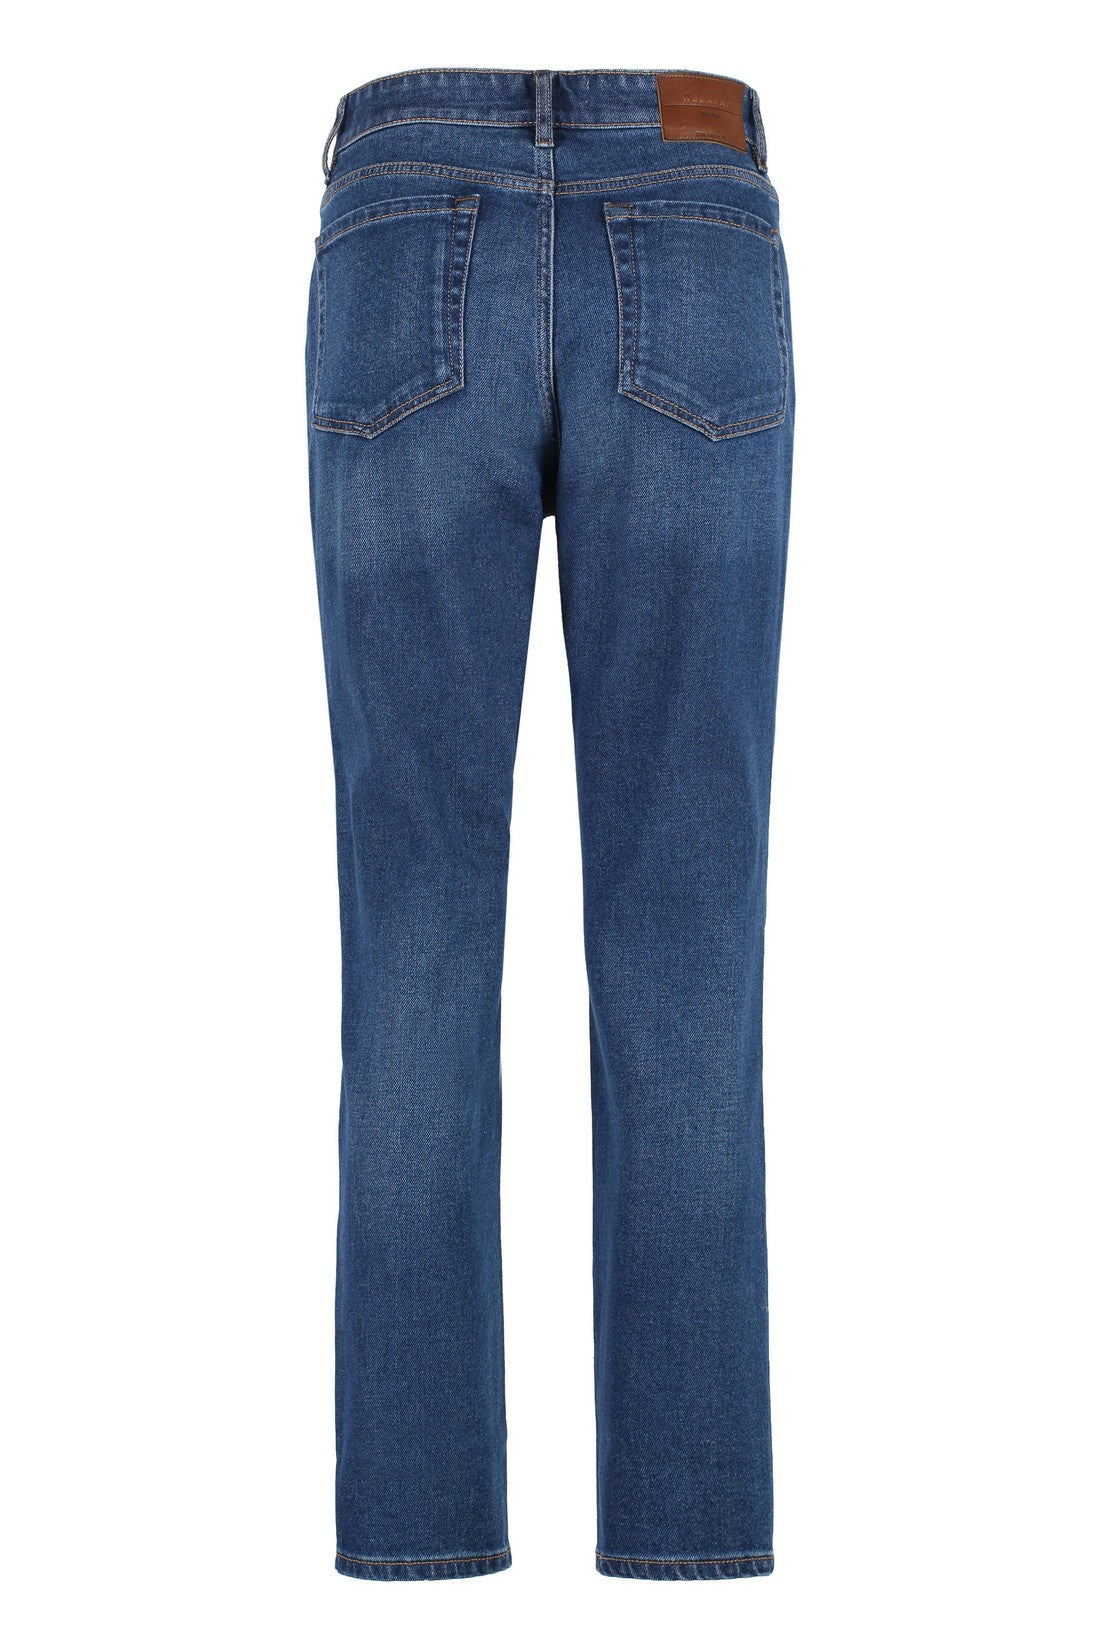 Weekend Max Mara-OUTLET-SALE-Eufrate cigarette jeans-ARCHIVIST